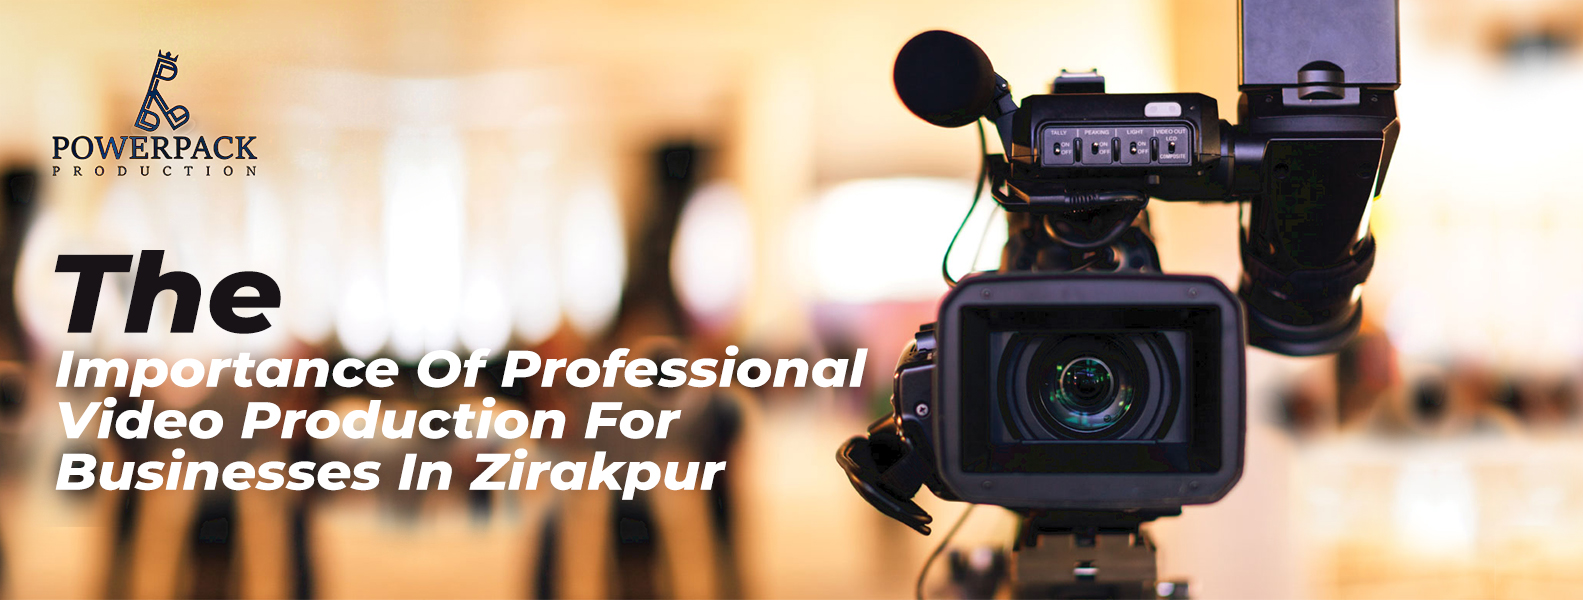 The Importance Of Professional Video Production For Businesses In Zirakpur 